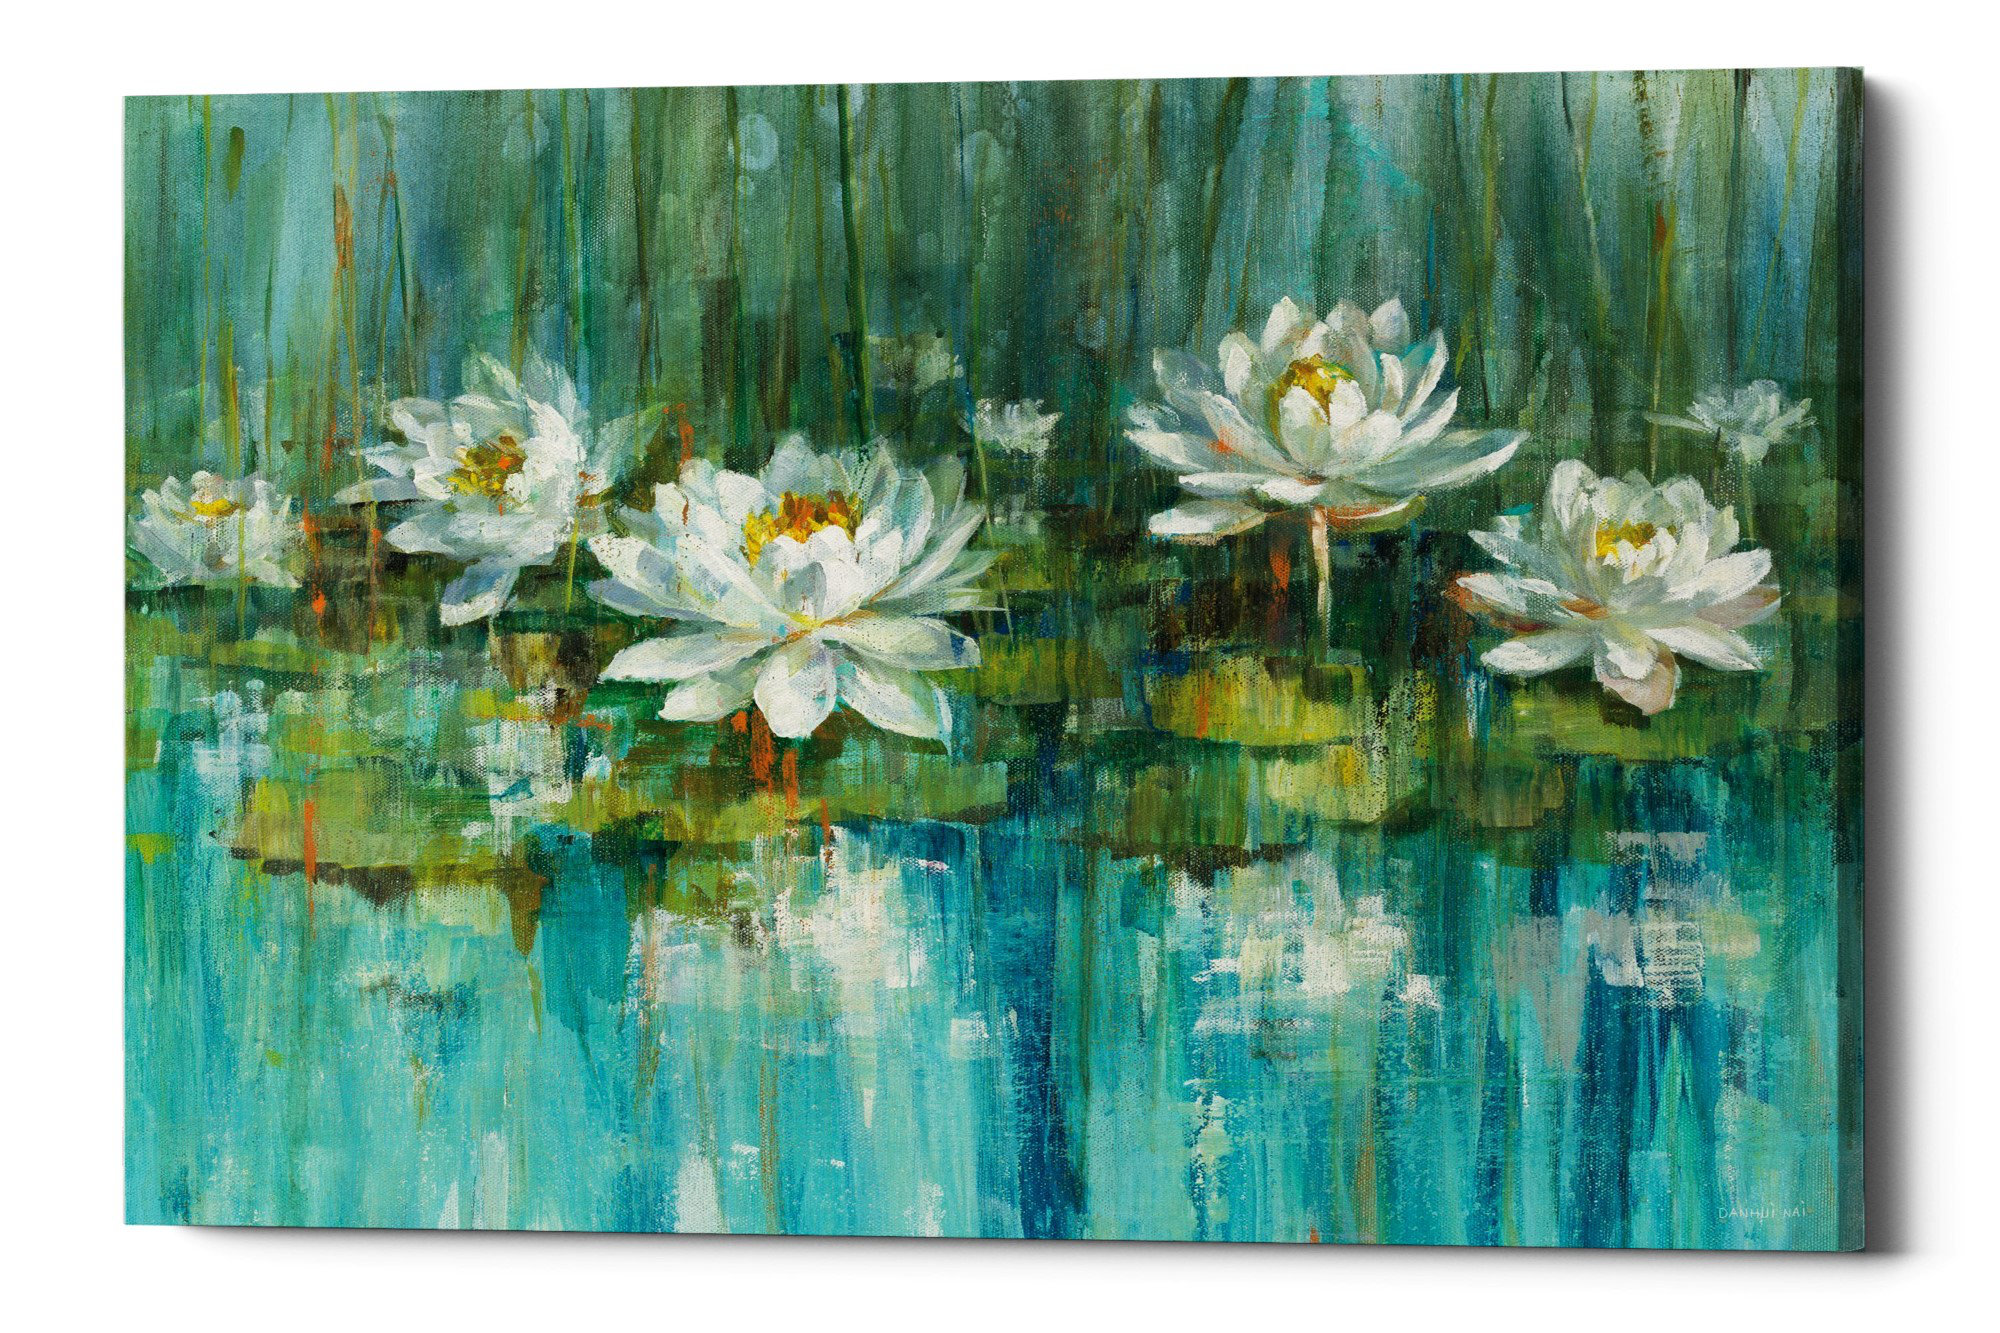 who painted lily pond